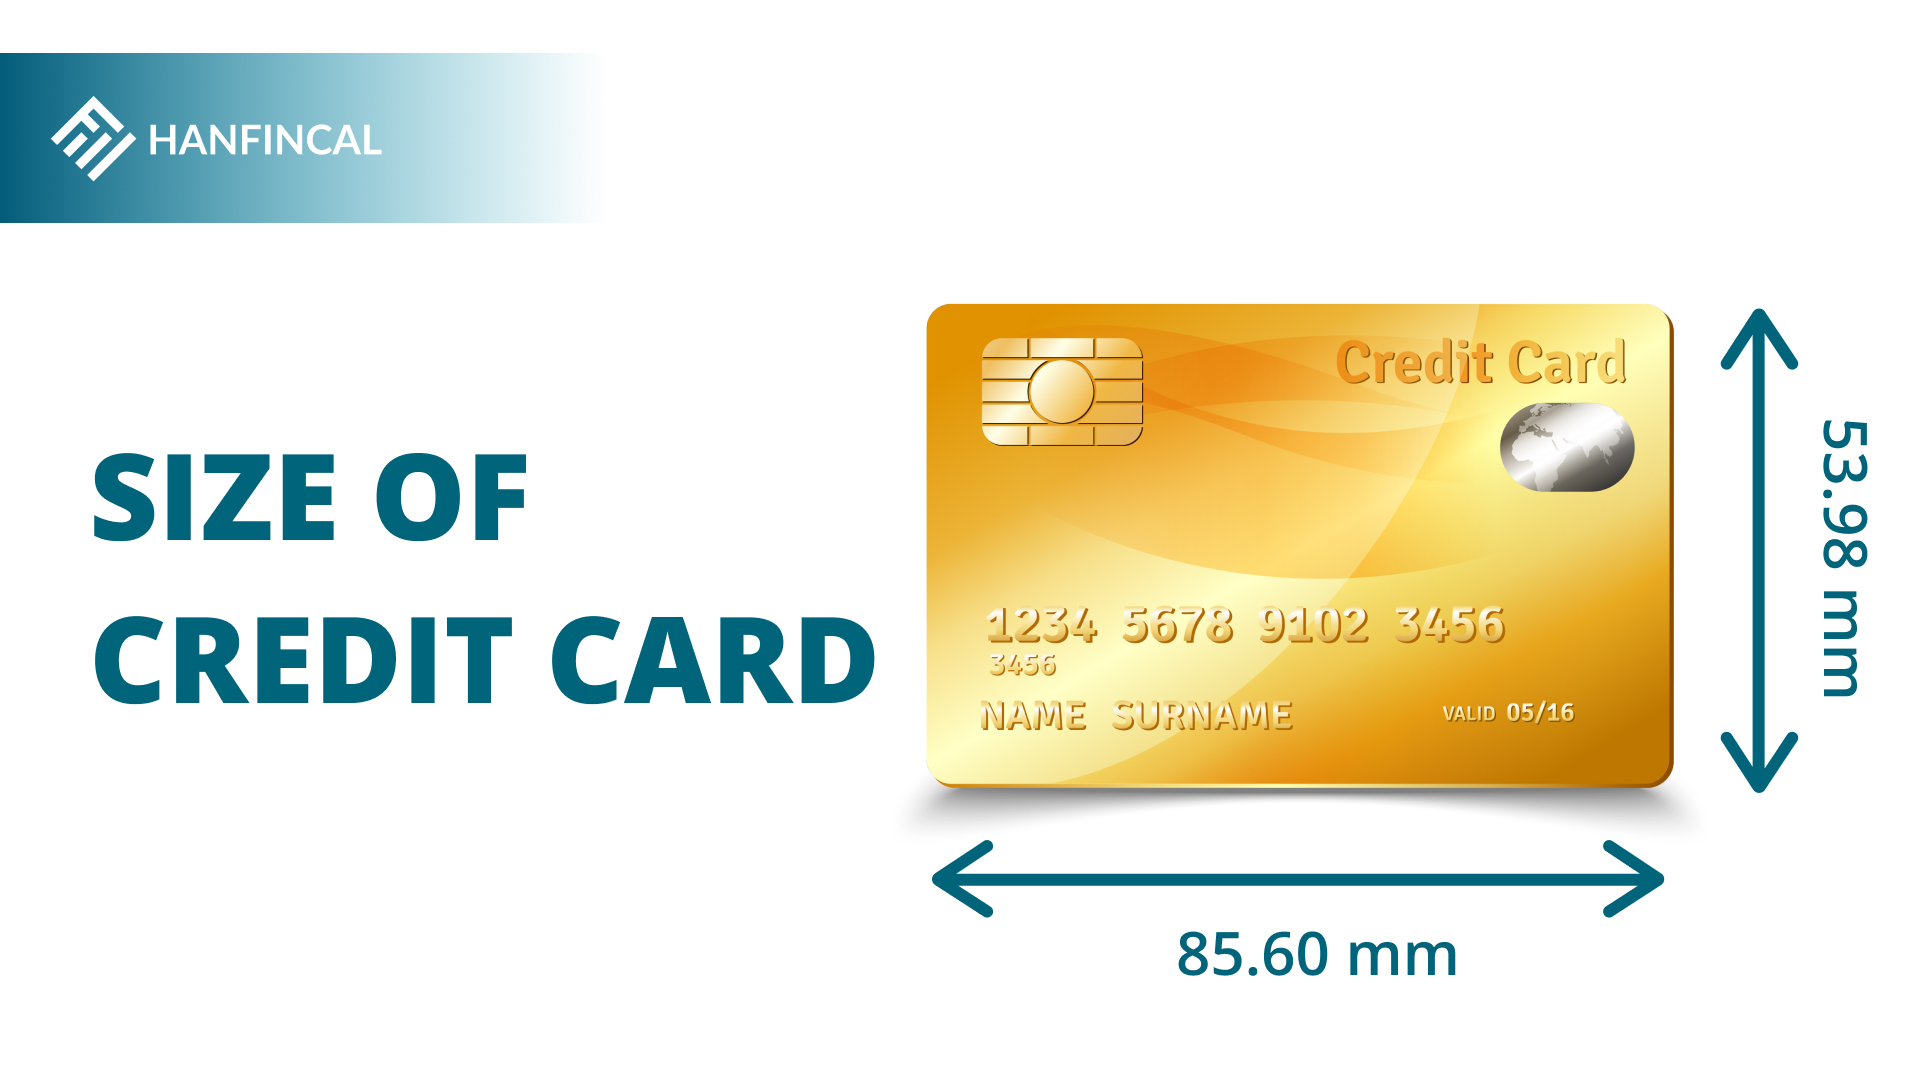 What are the dimensions of a credit card?